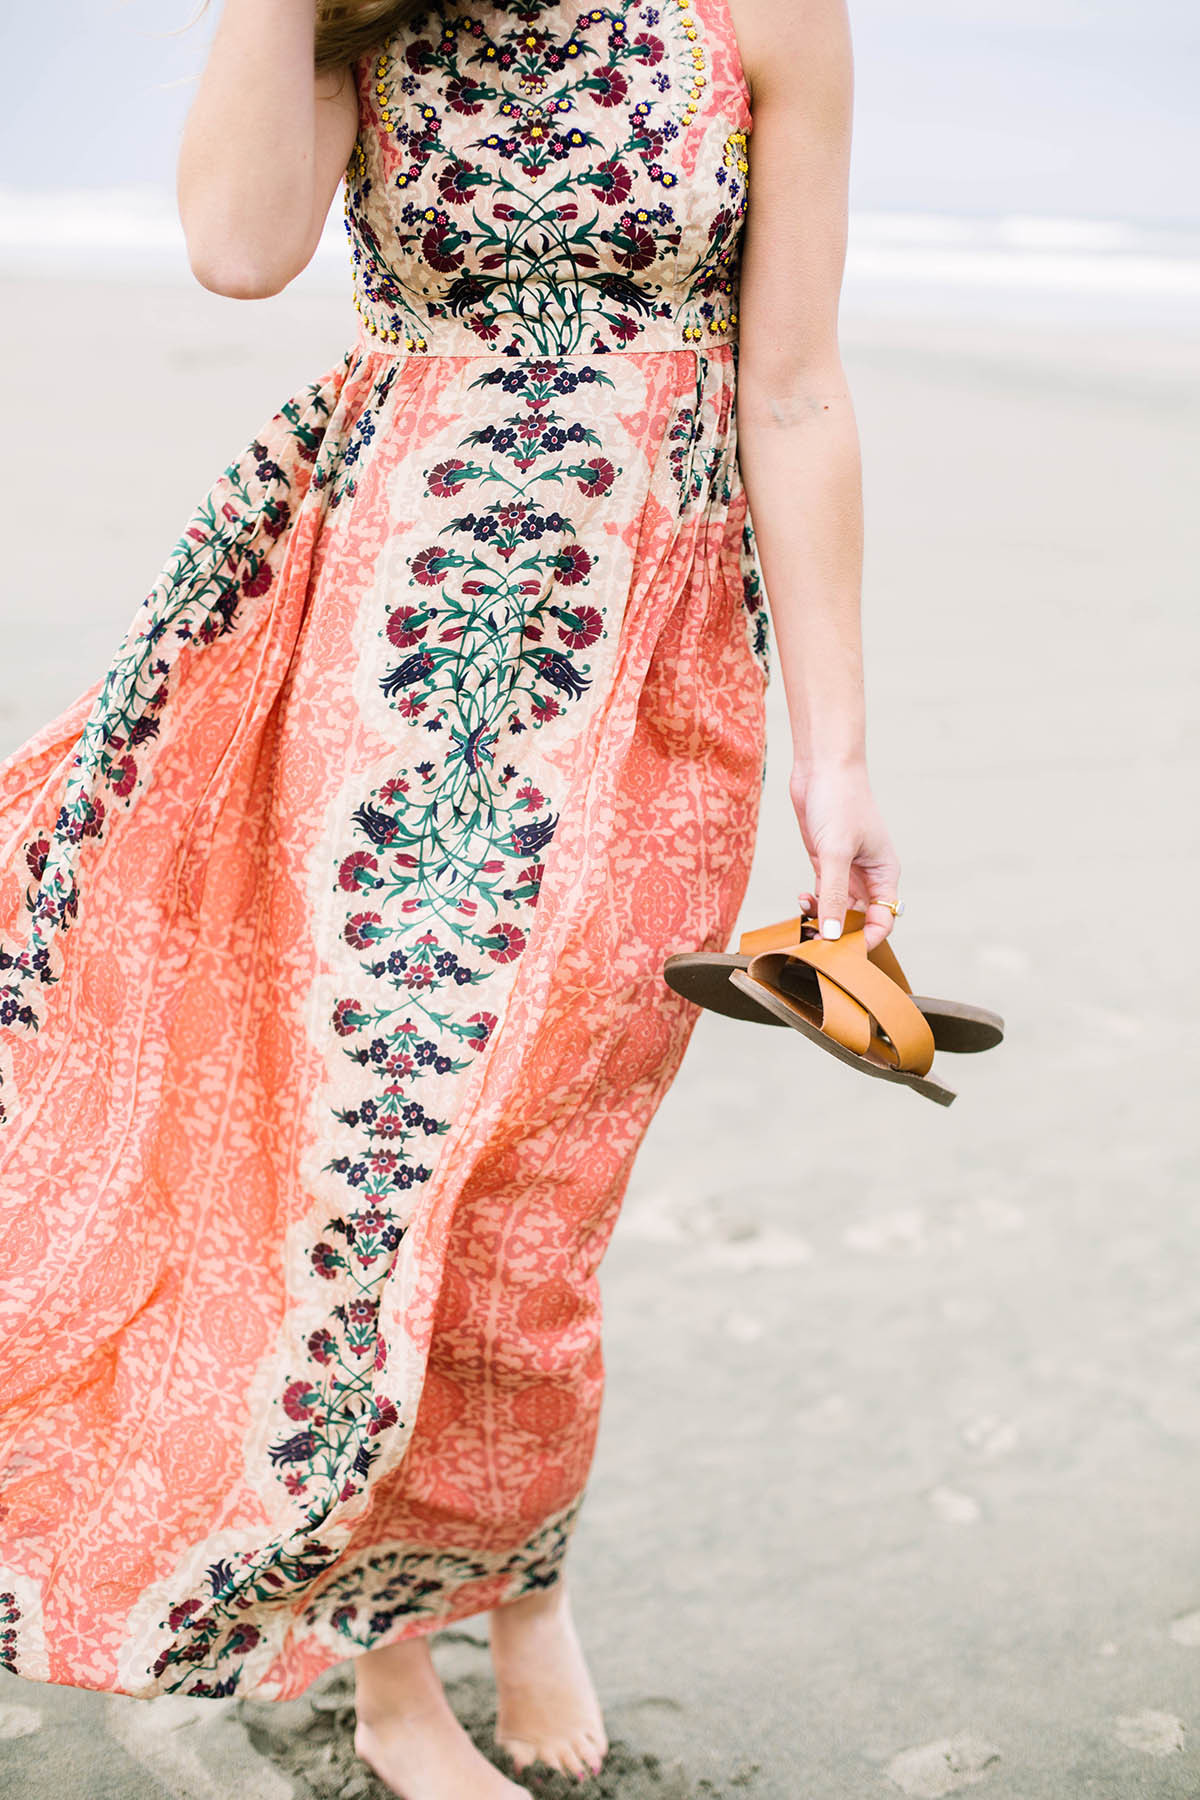 What To Wear To Beach Wedding
 What to Wear to a "Beach Formal" Wedding – Advice from a